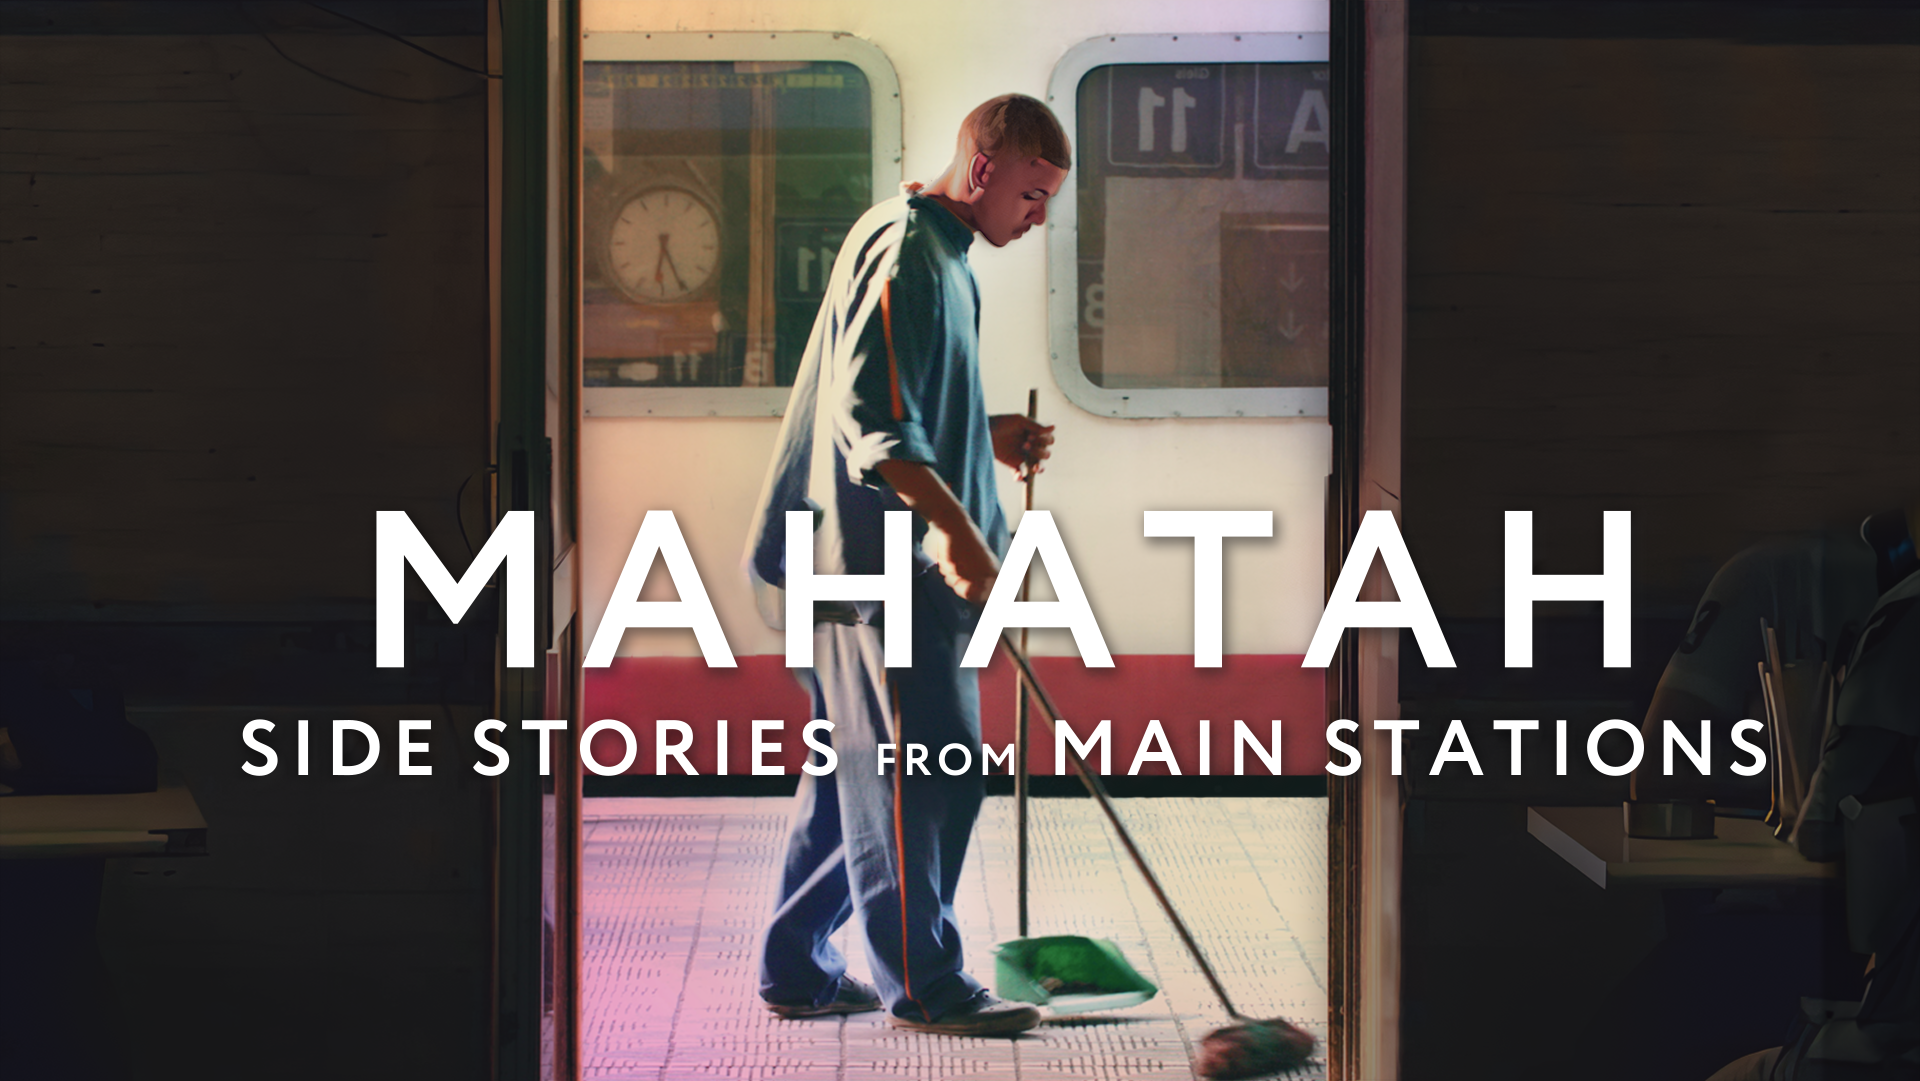 Mahatah - Side Stories from Main Stations